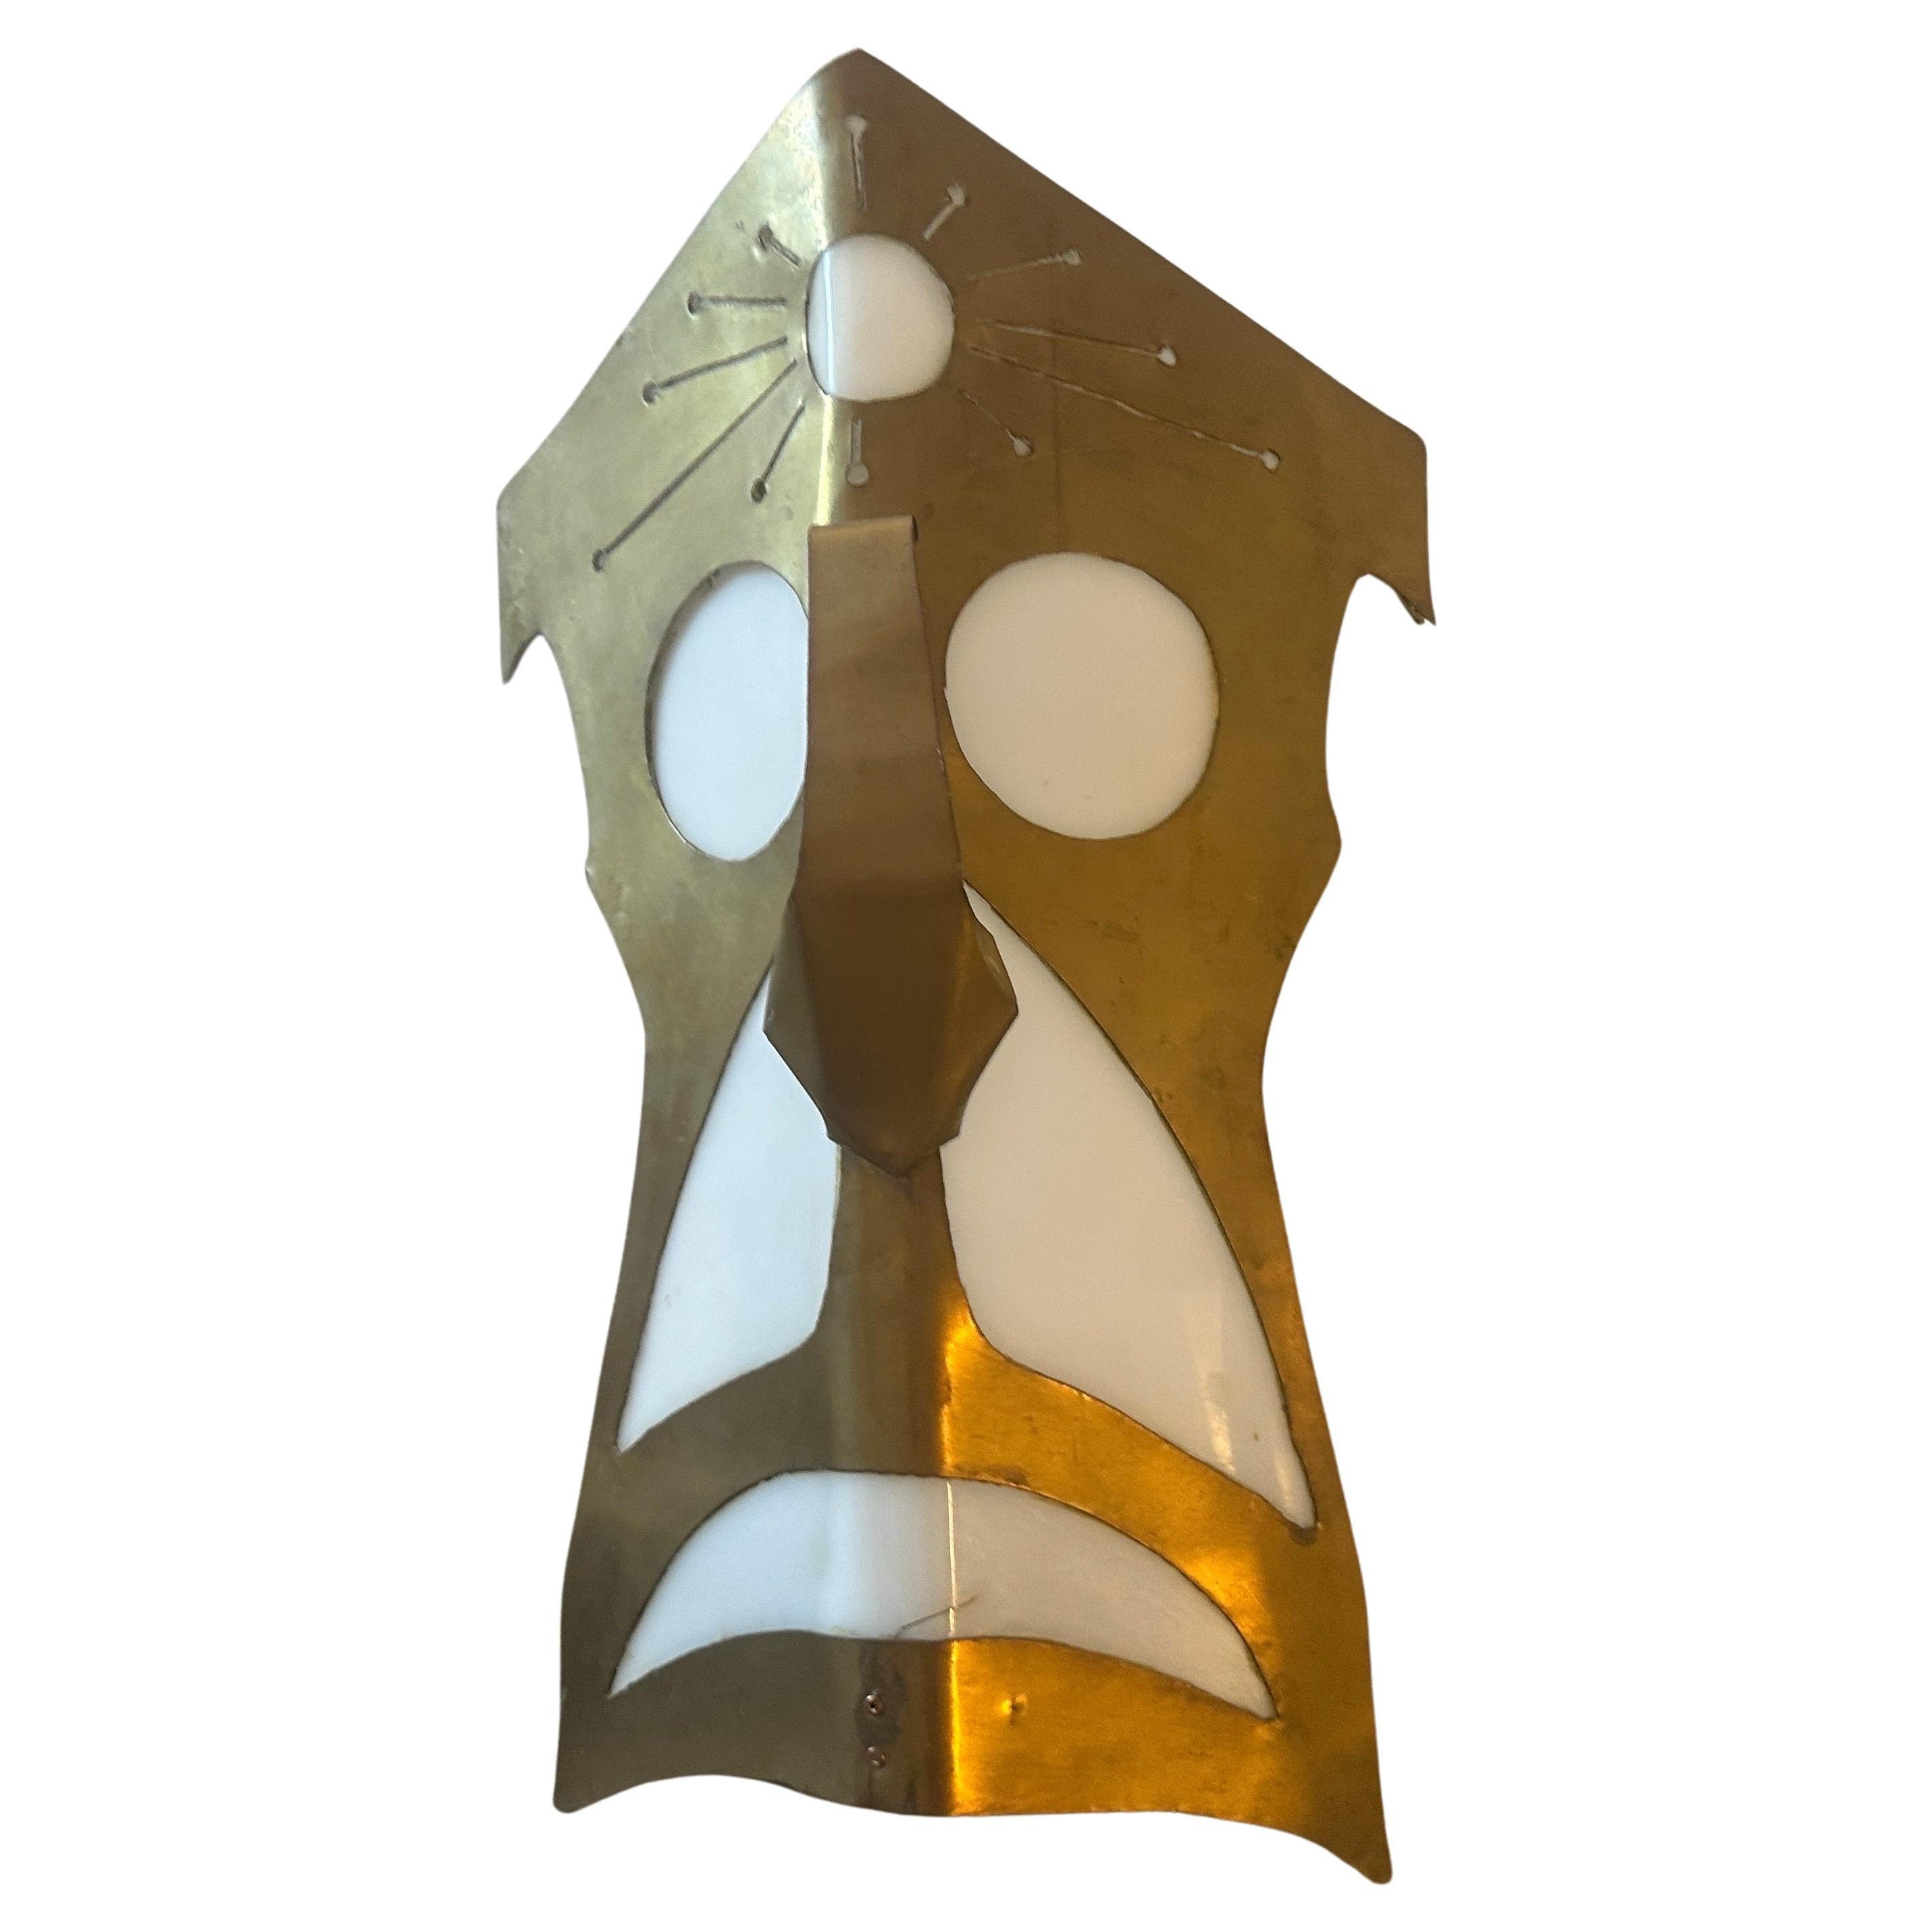 An hand-crafted brass and white plexiglass wall light depicting a tribal mask, it has been manufactured in Italy in the Eighties, brass it's in original patina, plexiglass white parts are in perfect condition and it's in working order. It's a unique